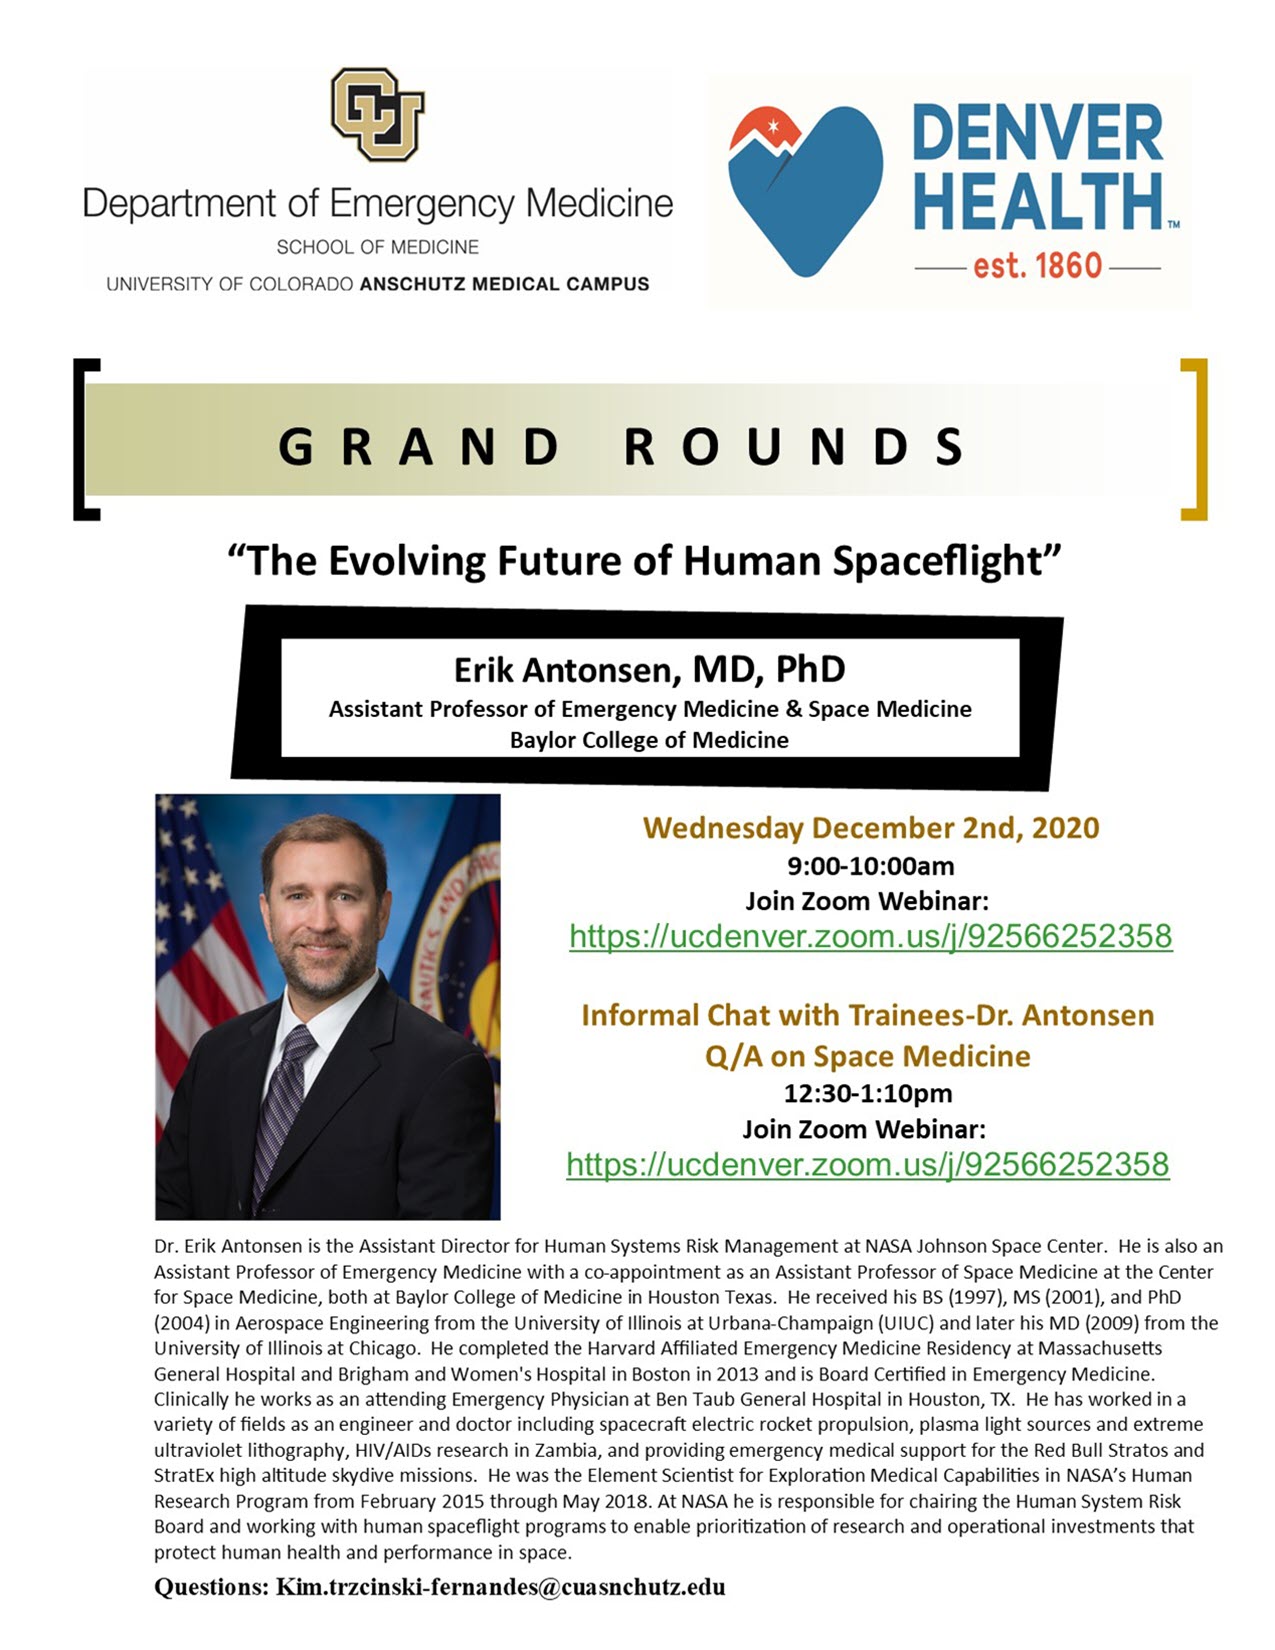 20201202 Grand Rounds Flyer